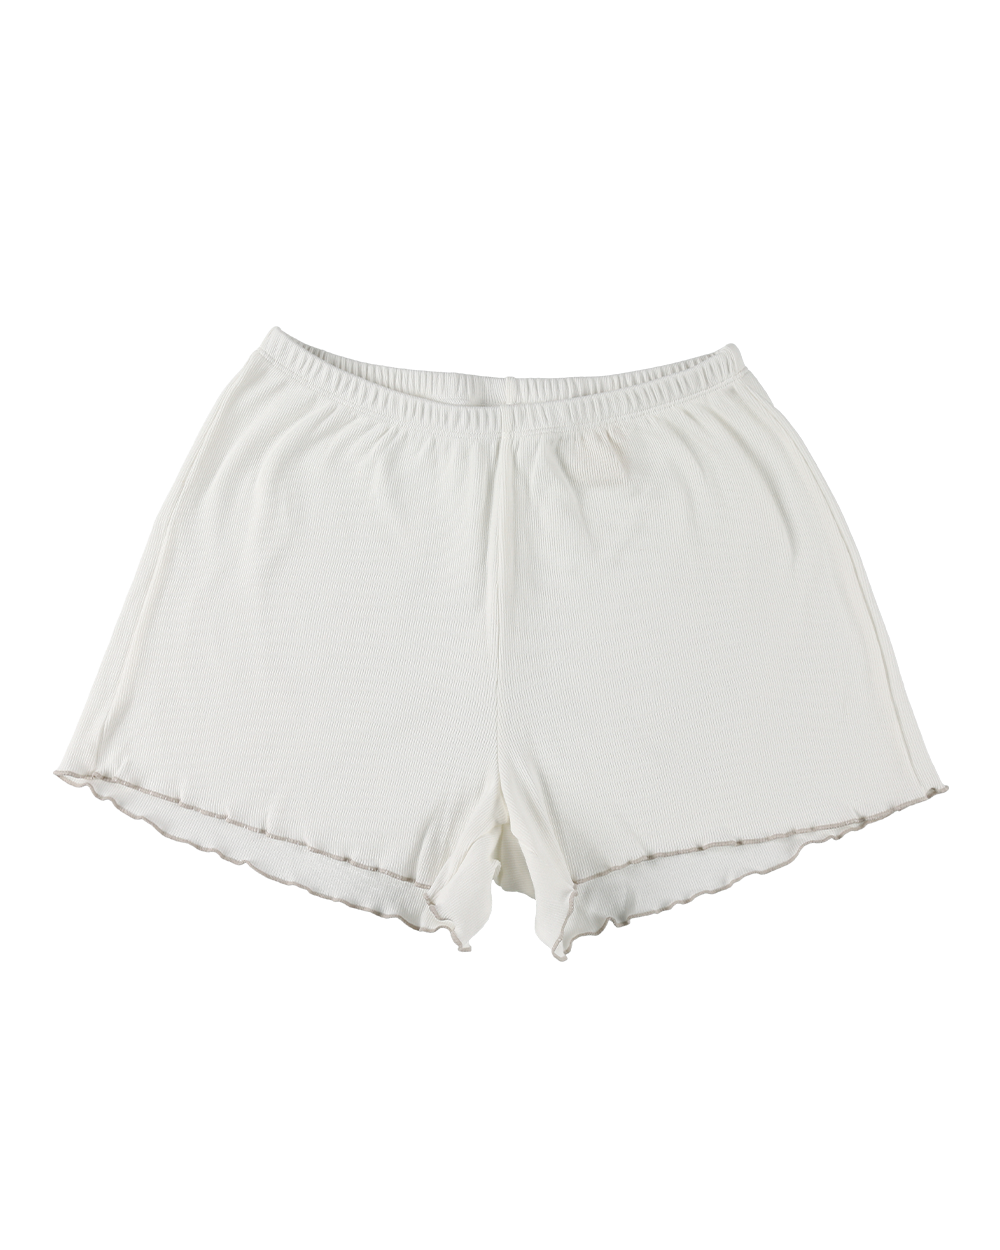 Wave shorts in white